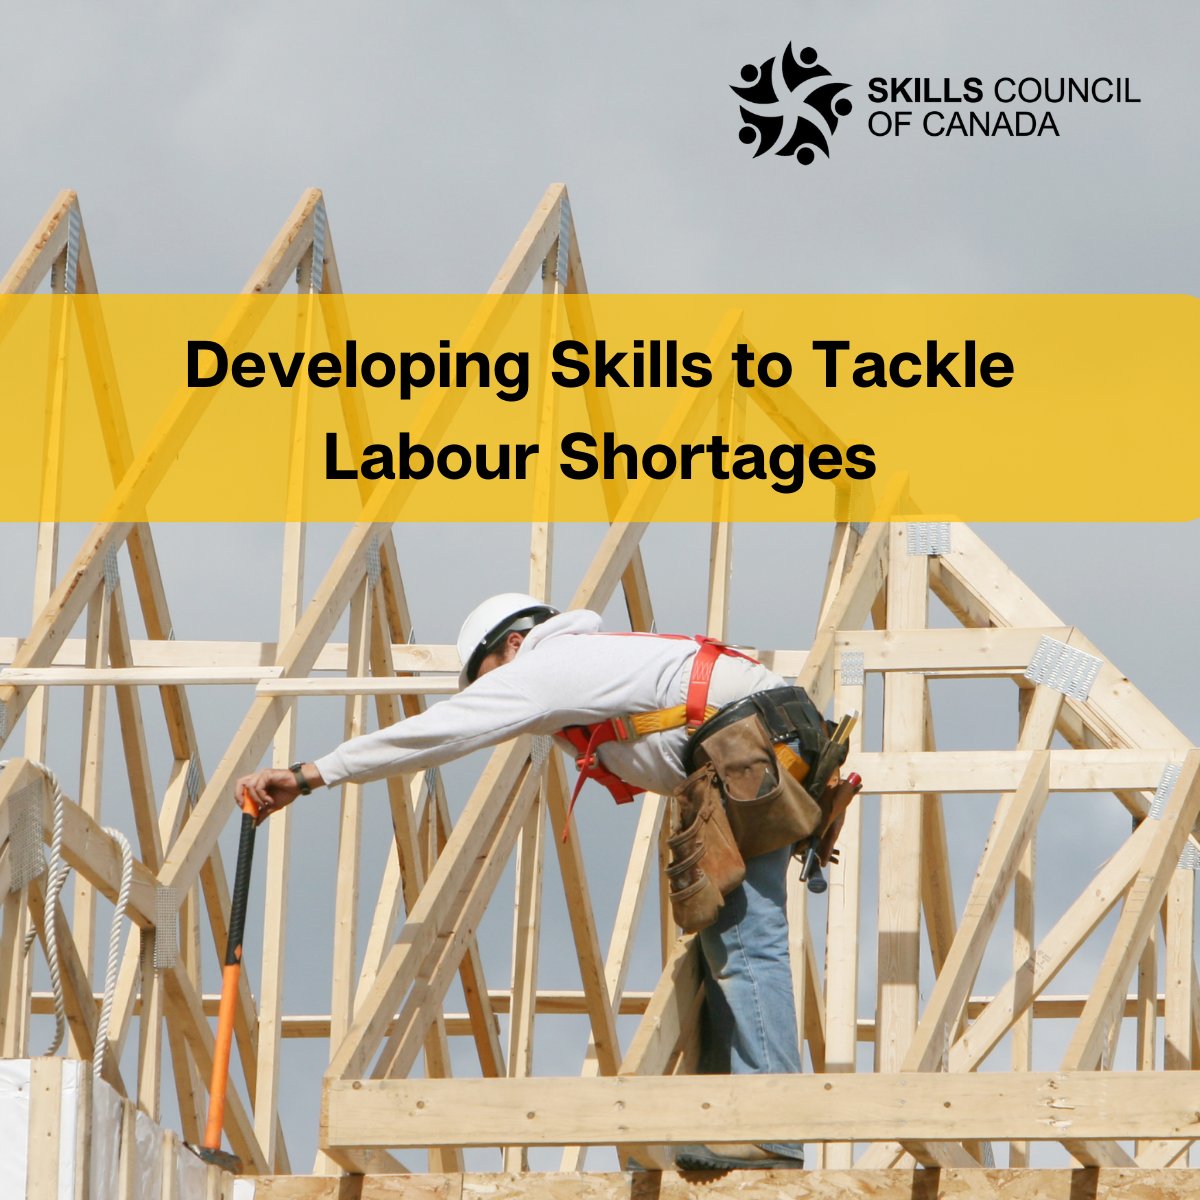 SCC 🤝 supports government efforts 👩‍⚖️ to enhance workforce skills 💼, particularly in sectors facing severe labour shortages 🛠️. #SCC #Partnerships #Collaboration #SkillsToEmployment #SkillsForSuccess